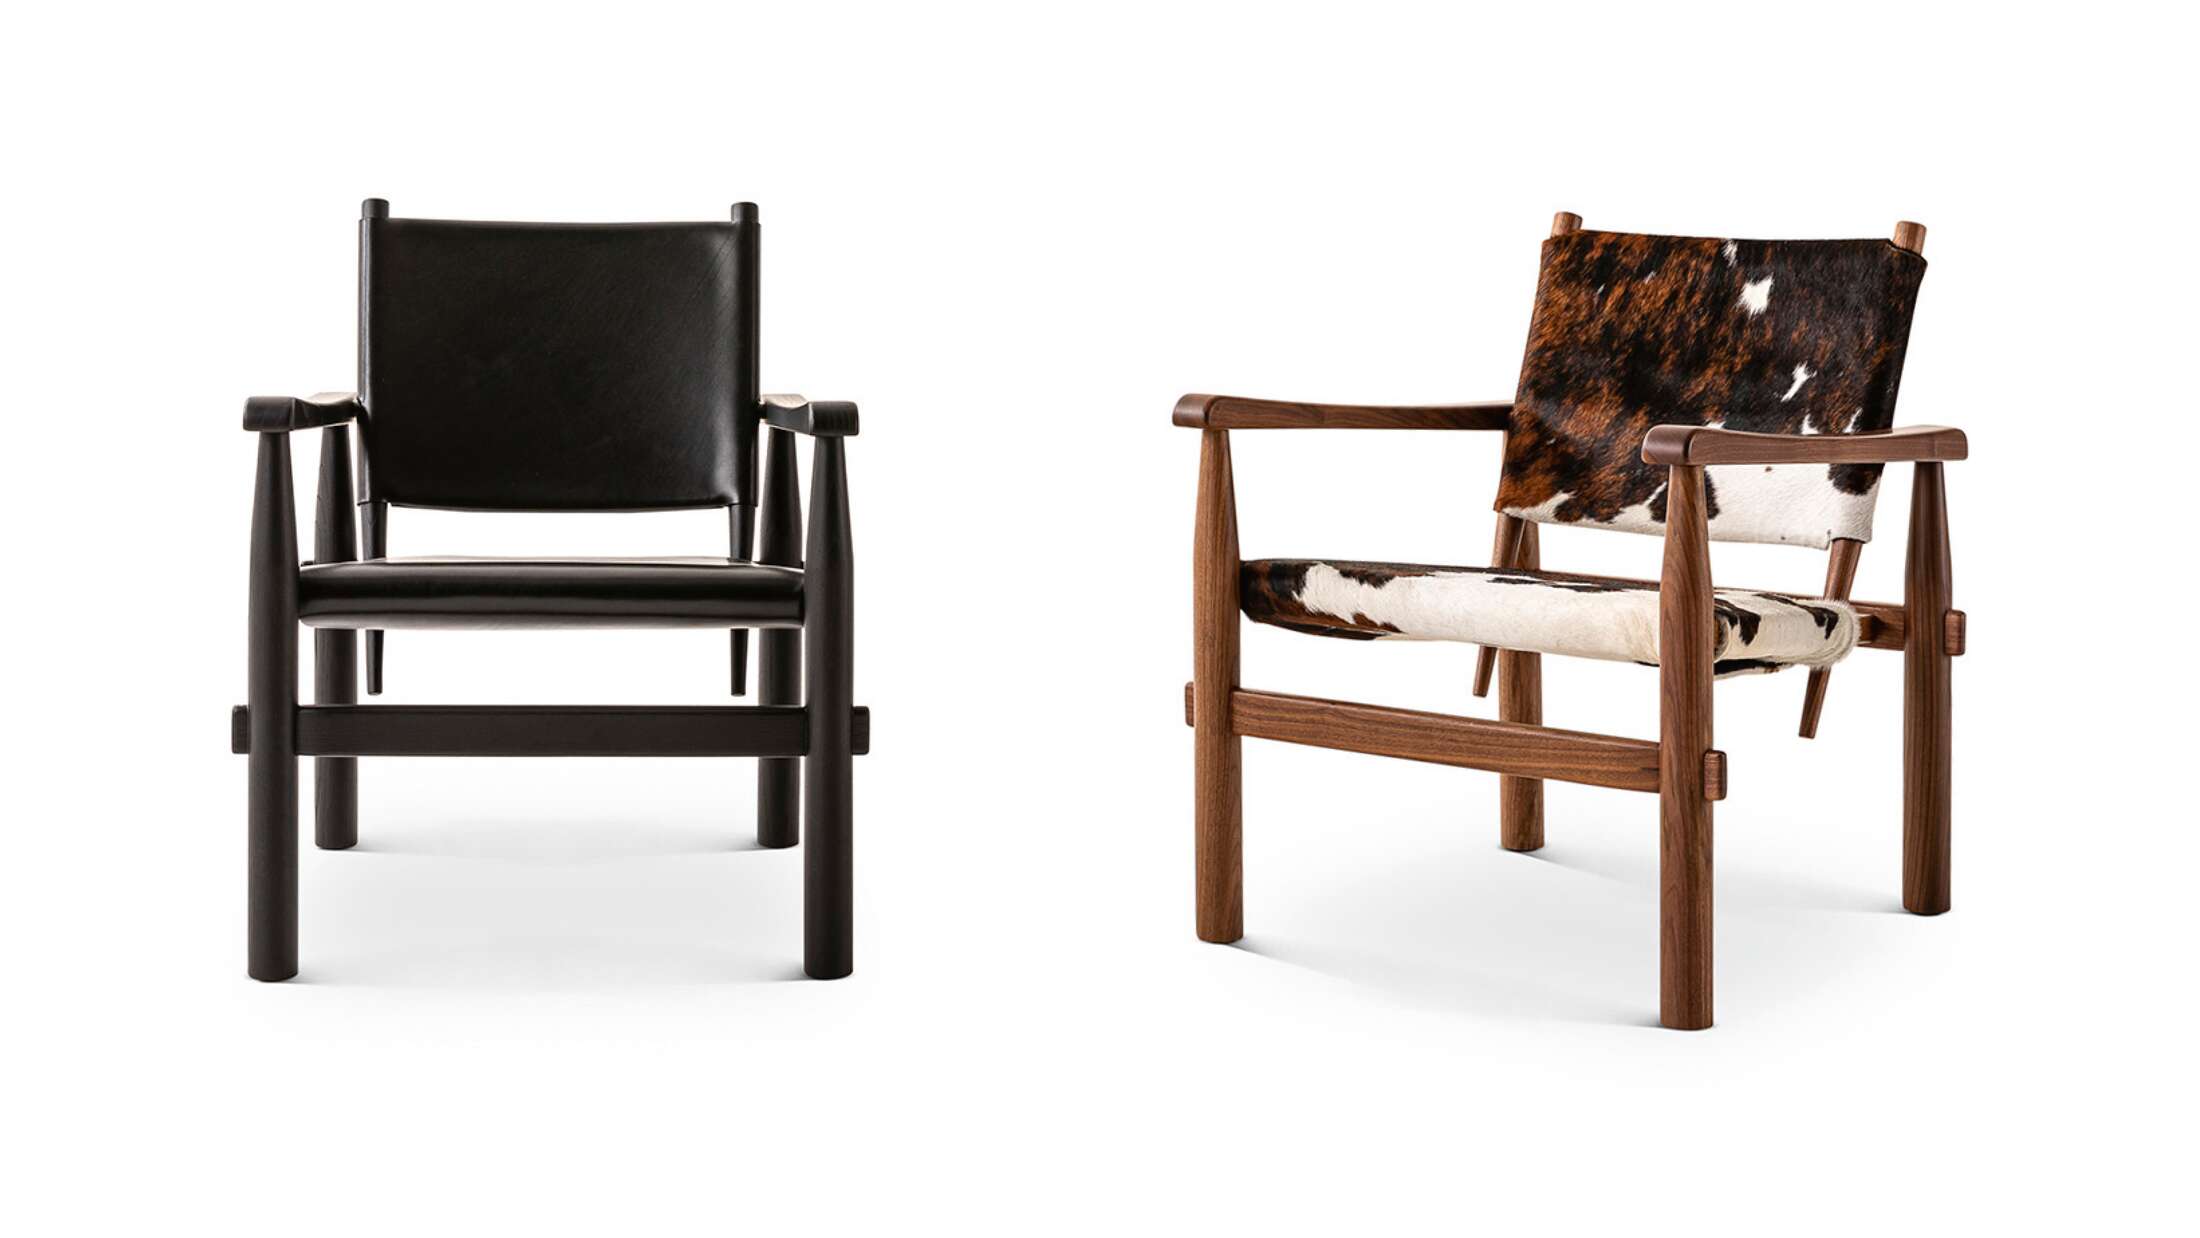 Prices vary dependent on the color and material. The price given applies to the chair as shown in the first picture. Charlotte Perriand 533 Doron Hotel Armchair. Available in American Walnut, black stained ash wood or brown stained ash wood.